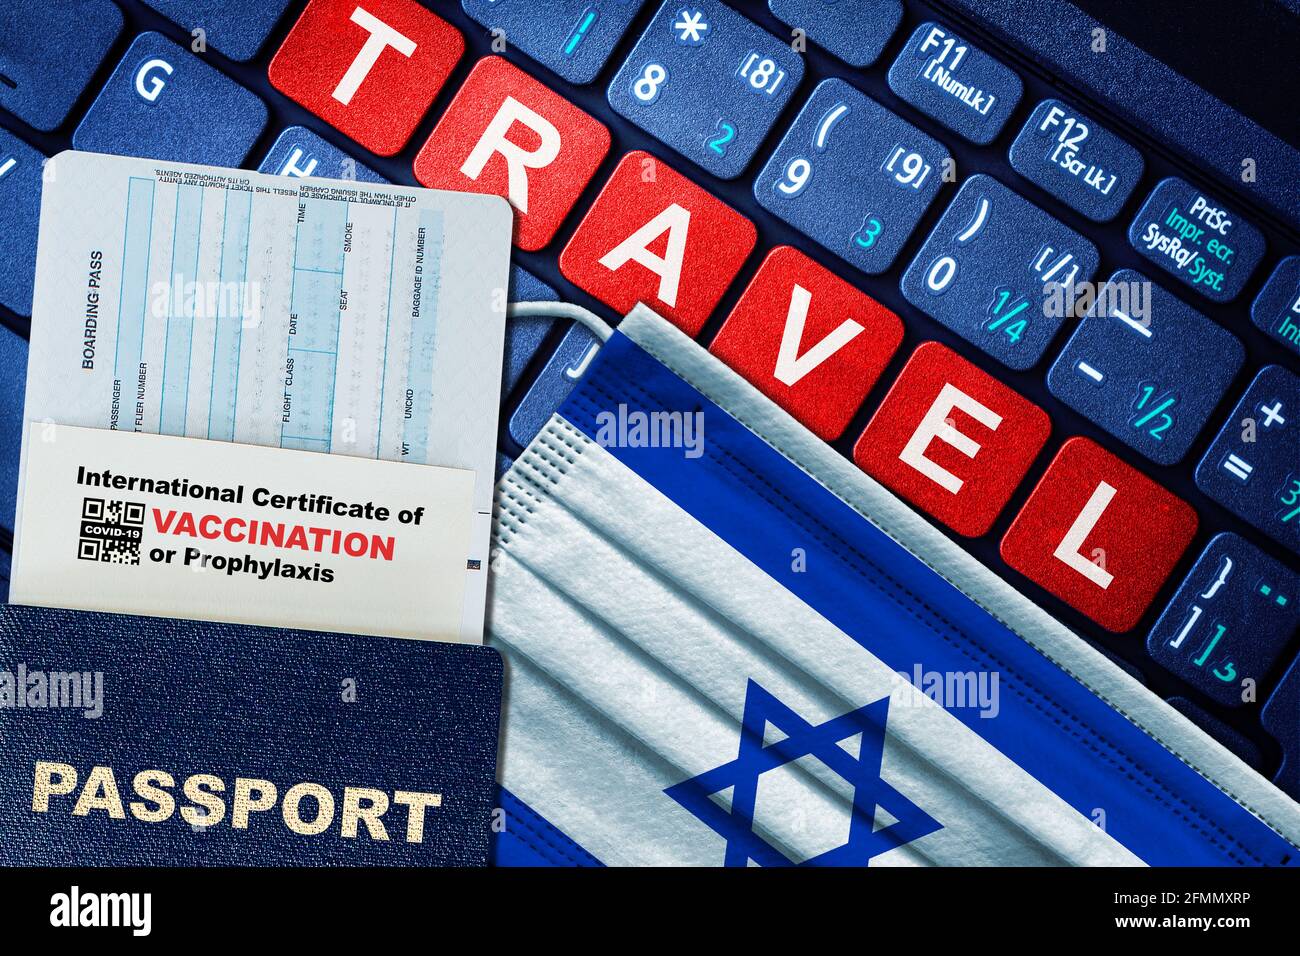 Israel new normal travel concept with passport, boarding pass, face mask with Israeli flag and certificate of COVID-19 vaccination on keyboard. Vaccin Stock Photo